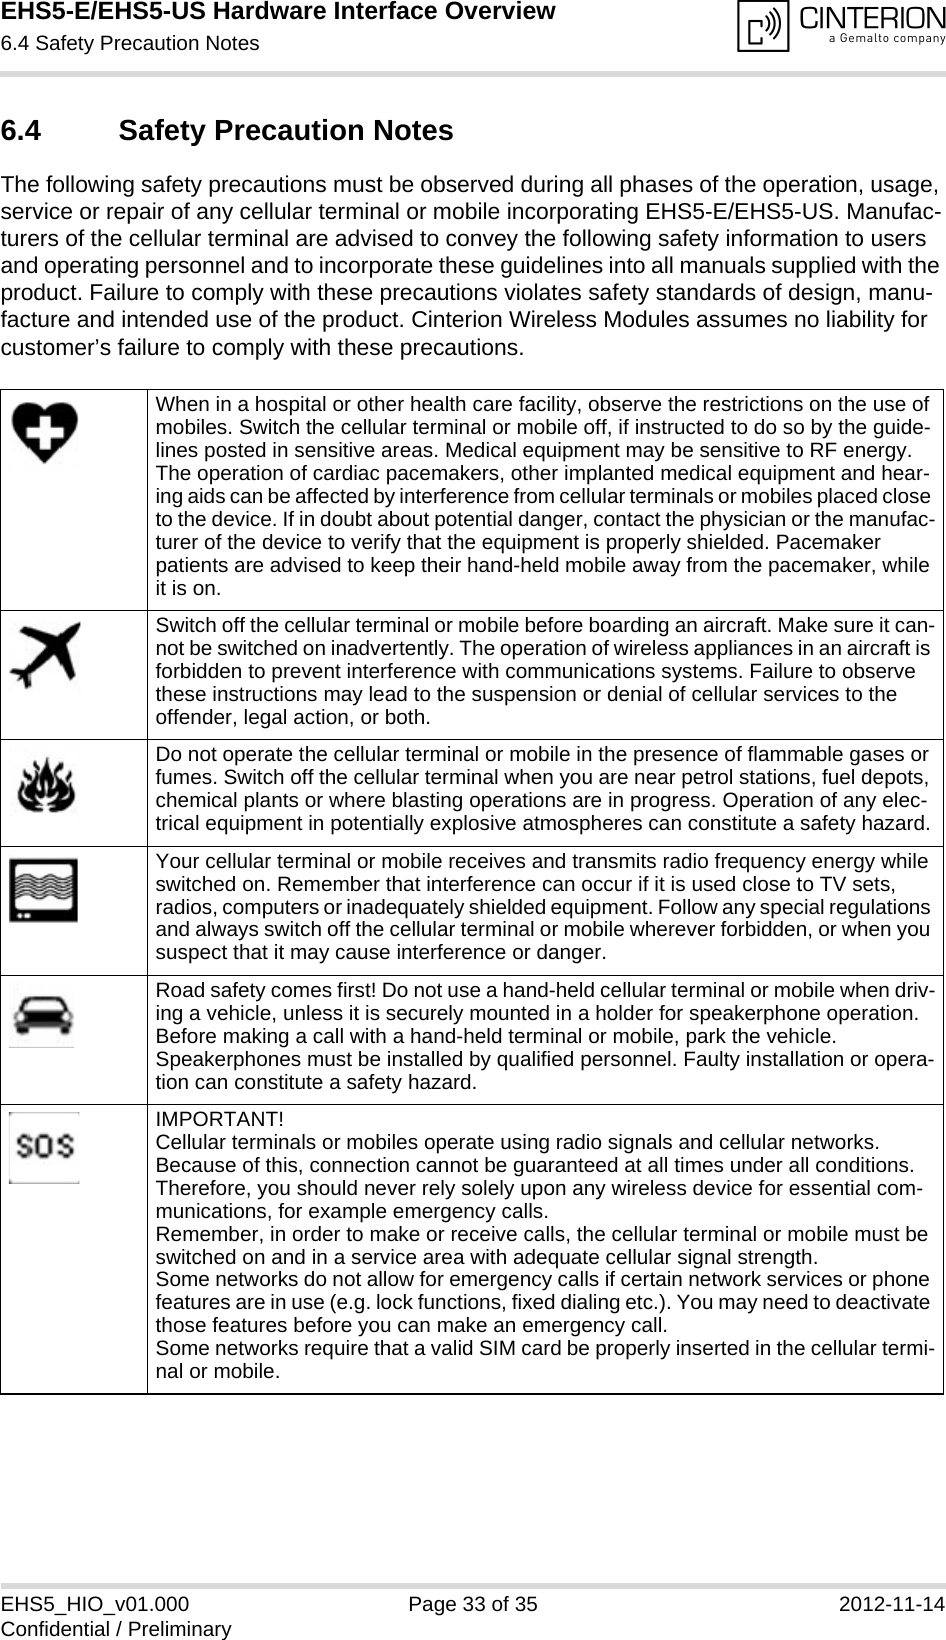 EHS5-E/EHS5-US Hardware Interface Overview6.4 Safety Precaution Notes33EHS5_HIO_v01.000 Page 33 of 35 2012-11-14Confidential / Preliminary6.4 Safety Precaution NotesThe following safety precautions must be observed during all phases of the operation, usage, service or repair of any cellular terminal or mobile incorporating EHS5-E/EHS5-US. Manufac-turers of the cellular terminal are advised to convey the following safety information to users and operating personnel and to incorporate these guidelines into all manuals supplied with the product. Failure to comply with these precautions violates safety standards of design, manu-facture and intended use of the product. Cinterion Wireless Modules assumes no liability for customer’s failure to comply with these precautions.When in a hospital or other health care facility, observe the restrictions on the use of mobiles. Switch the cellular terminal or mobile off, if instructed to do so by the guide-lines posted in sensitive areas. Medical equipment may be sensitive to RF energy. The operation of cardiac pacemakers, other implanted medical equipment and hear-ing aids can be affected by interference from cellular terminals or mobiles placed close to the device. If in doubt about potential danger, contact the physician or the manufac-turer of the device to verify that the equipment is properly shielded. Pacemaker patients are advised to keep their hand-held mobile away from the pacemaker, while it is on. Switch off the cellular terminal or mobile before boarding an aircraft. Make sure it can-not be switched on inadvertently. The operation of wireless appliances in an aircraft is forbidden to prevent interference with communications systems. Failure to observe these instructions may lead to the suspension or denial of cellular services to the offender, legal action, or both.Do not operate the cellular terminal or mobile in the presence of flammable gases or fumes. Switch off the cellular terminal when you are near petrol stations, fuel depots, chemical plants or where blasting operations are in progress. Operation of any elec-trical equipment in potentially explosive atmospheres can constitute a safety hazard.Your cellular terminal or mobile receives and transmits radio frequency energy while switched on. Remember that interference can occur if it is used close to TV sets, radios, computers or inadequately shielded equipment. Follow any special regulations and always switch off the cellular terminal or mobile wherever forbidden, or when you suspect that it may cause interference or danger.Road safety comes first! Do not use a hand-held cellular terminal or mobile when driv-ing a vehicle, unless it is securely mounted in a holder for speakerphone operation. Before making a call with a hand-held terminal or mobile, park the vehicle. Speakerphones must be installed by qualified personnel. Faulty installation or opera-tion can constitute a safety hazard.IMPORTANT!Cellular terminals or mobiles operate using radio signals and cellular networks. Because of this, connection cannot be guaranteed at all times under all conditions. Therefore, you should never rely solely upon any wireless device for essential com-munications, for example emergency calls. Remember, in order to make or receive calls, the cellular terminal or mobile must be switched on and in a service area with adequate cellular signal strength. Some networks do not allow for emergency calls if certain network services or phone features are in use (e.g. lock functions, fixed dialing etc.). You may need to deactivate those features before you can make an emergency call.Some networks require that a valid SIM card be properly inserted in the cellular termi-nal or mobile.